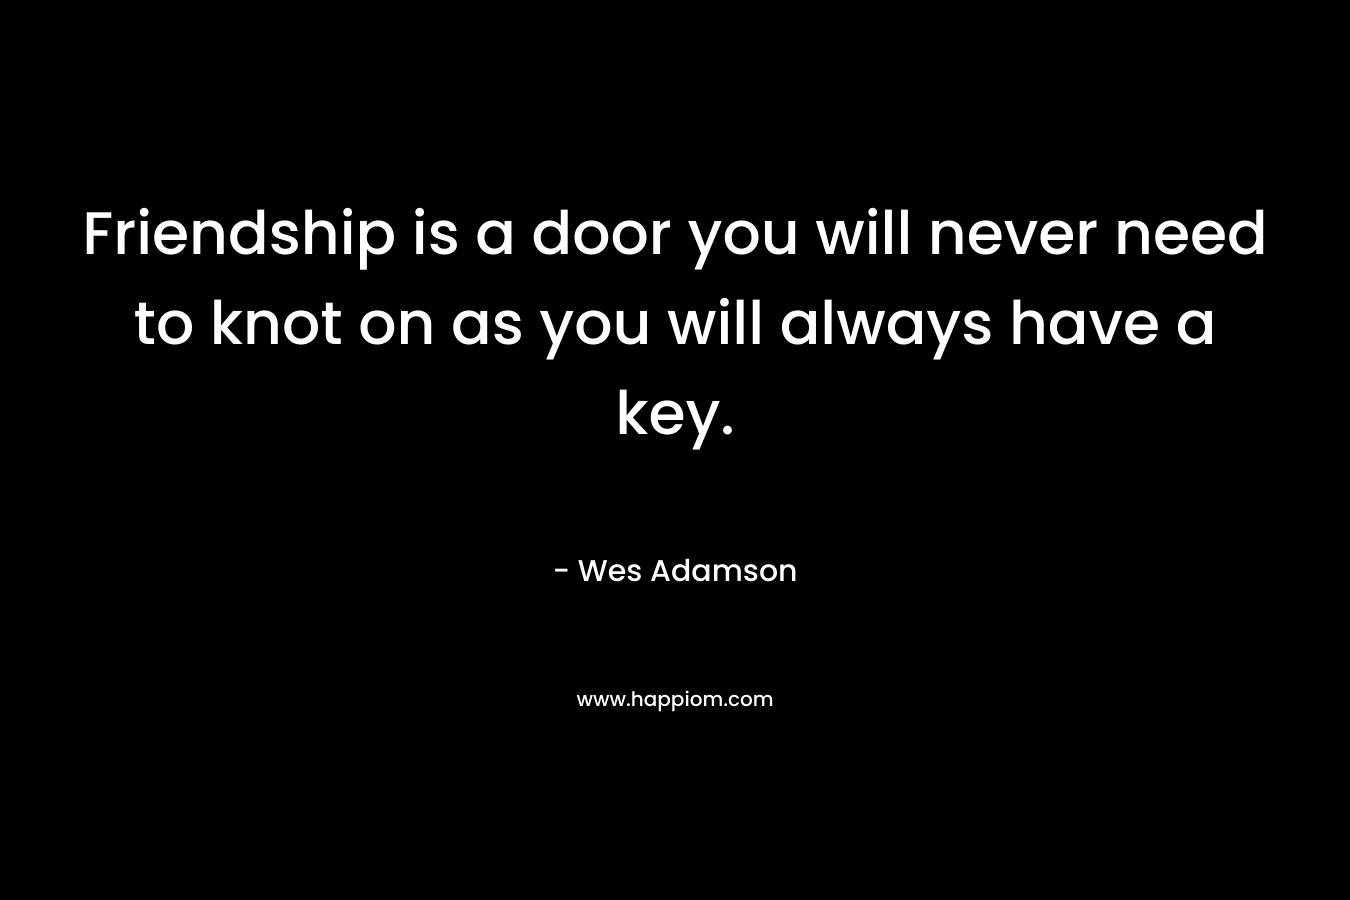 Friendship is a door you will never need to knot on as you will always have a key. – Wes Adamson